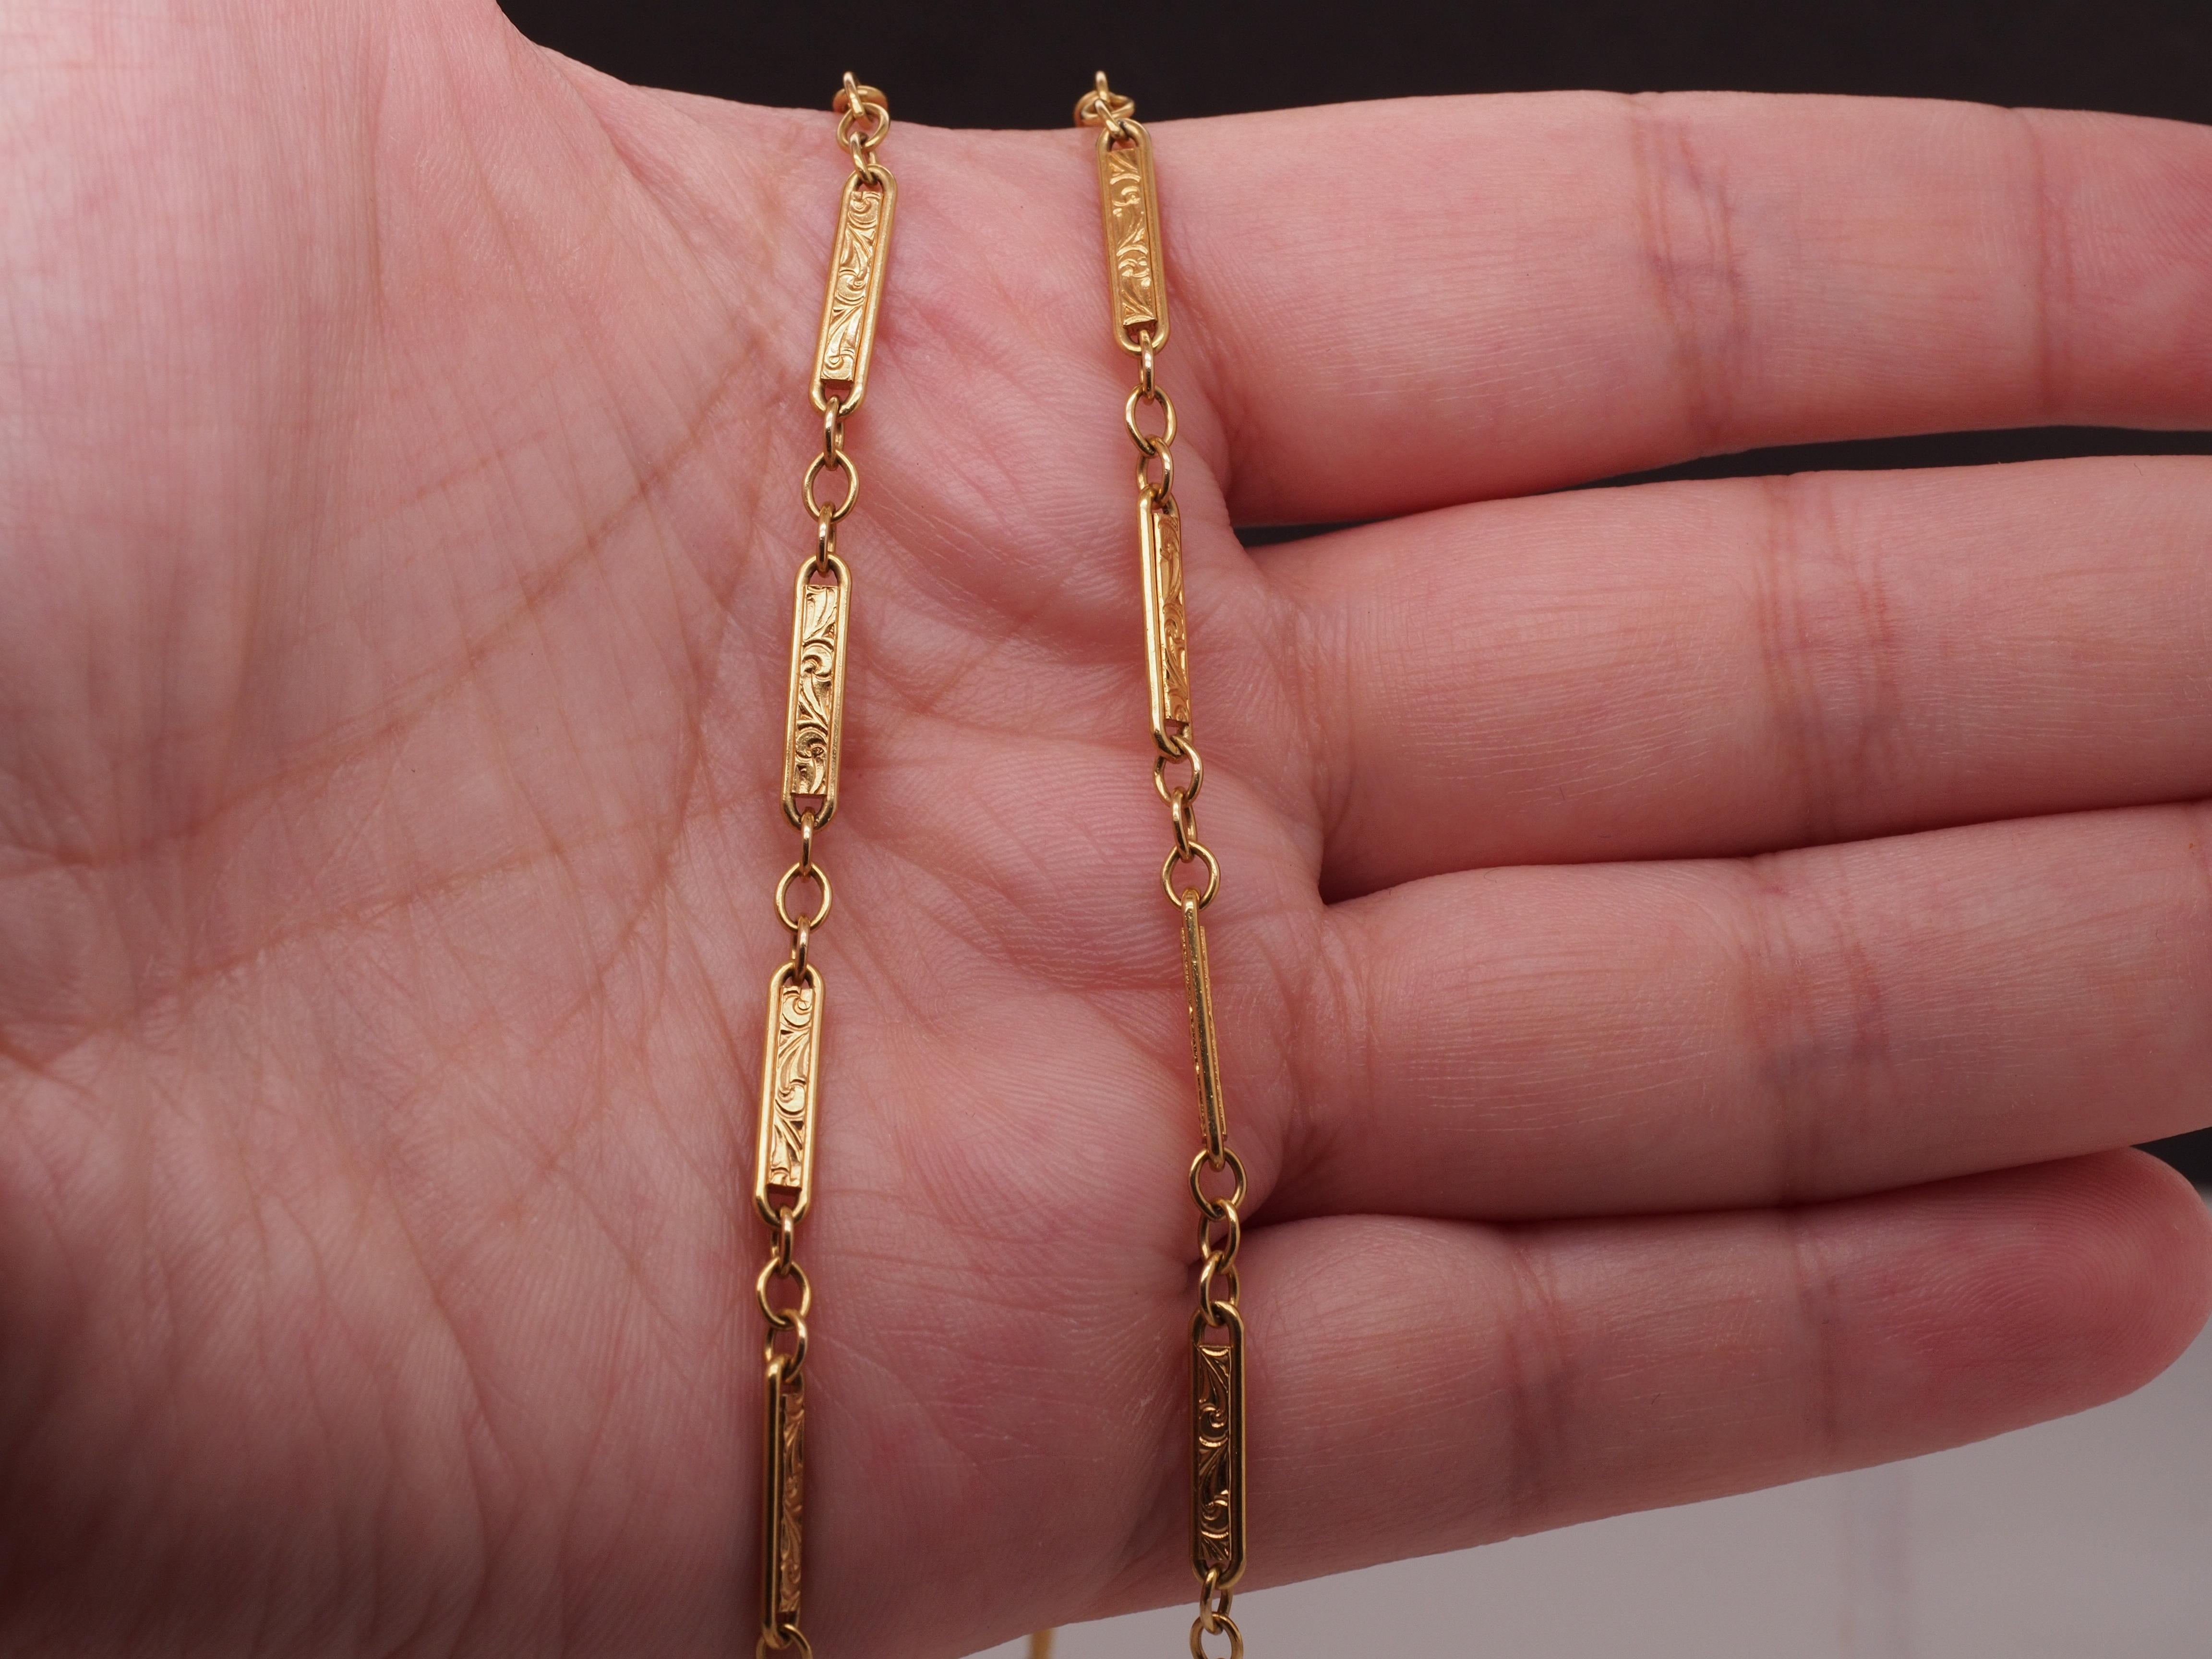 Women's Circa 1910s Edwardian 14K Yellow Gold 26.5 Inch Engraved Link Necklace Chain For Sale